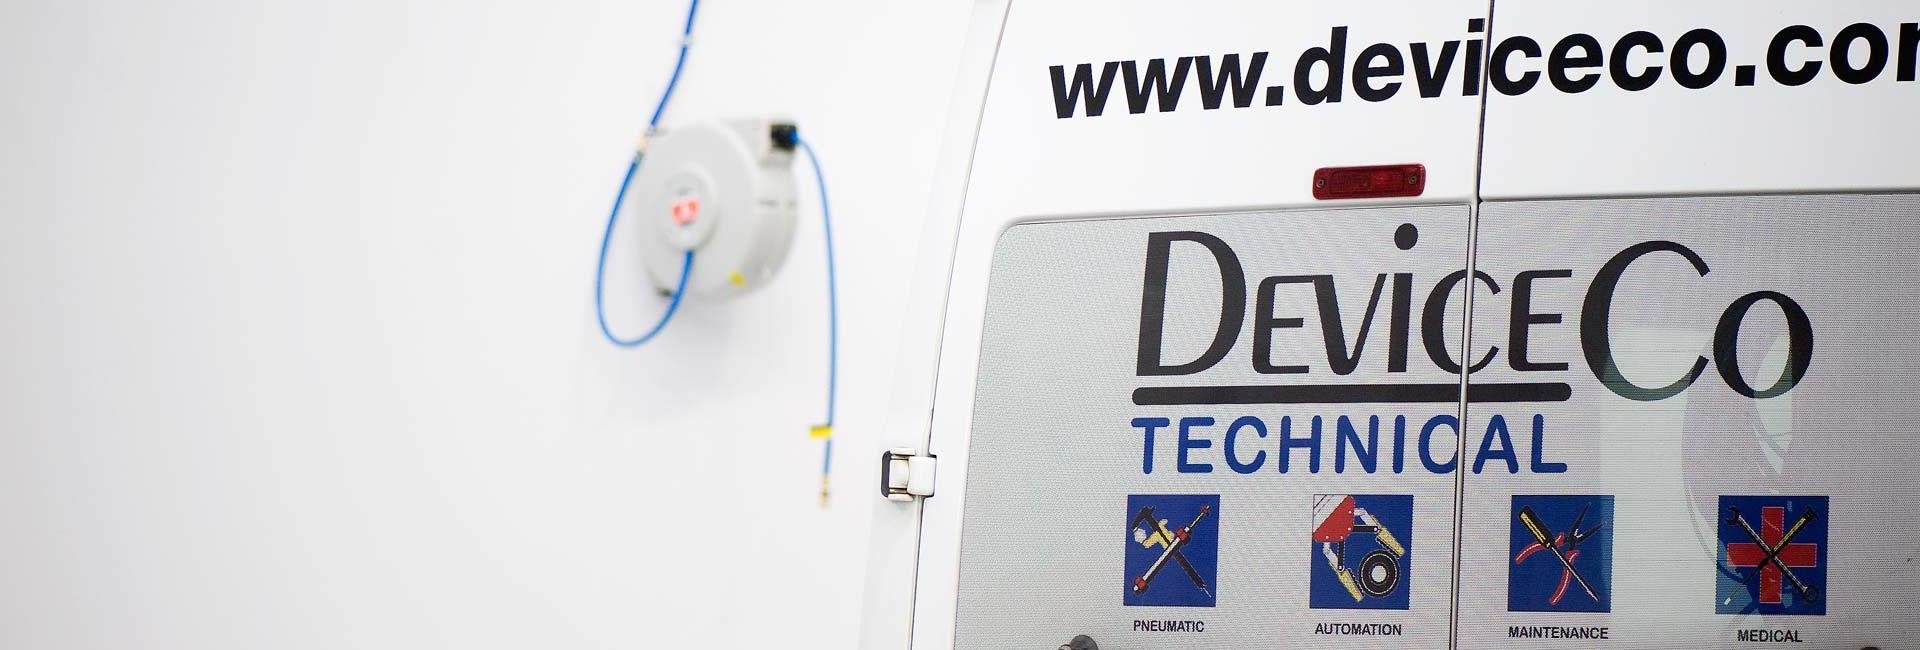 DeviceCo Technical